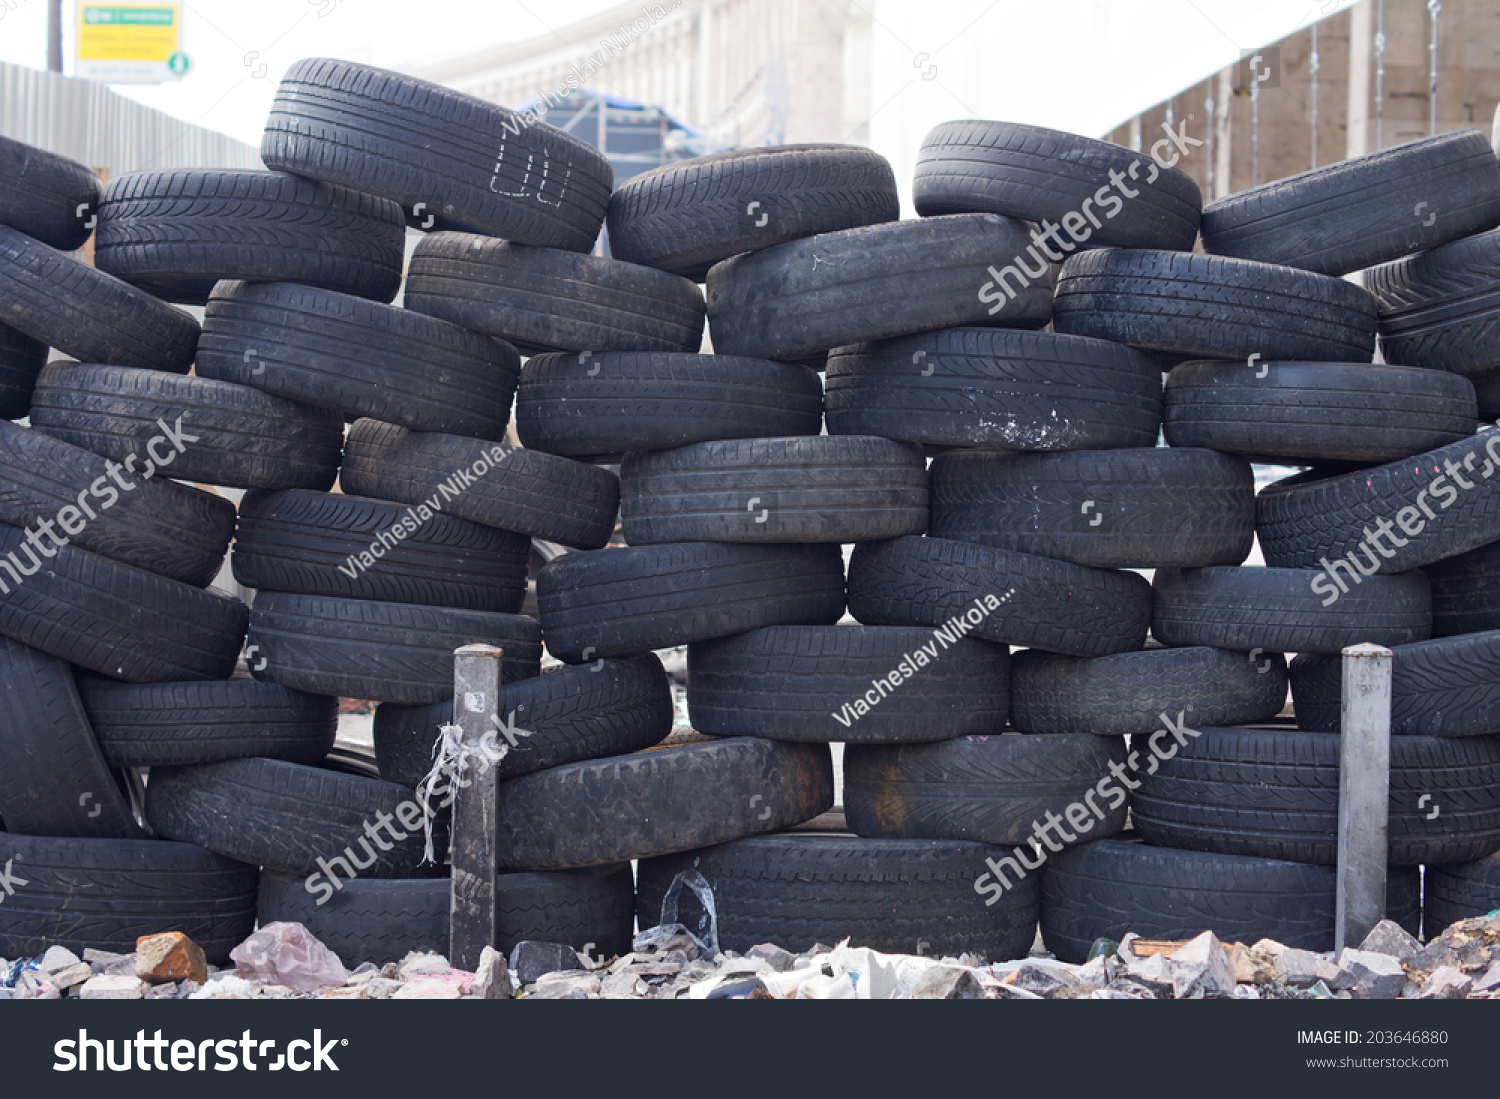 Old tires stacked to form a barricade or wall at a fairground to provide a safety feature for participants on rides and amusements #203646880